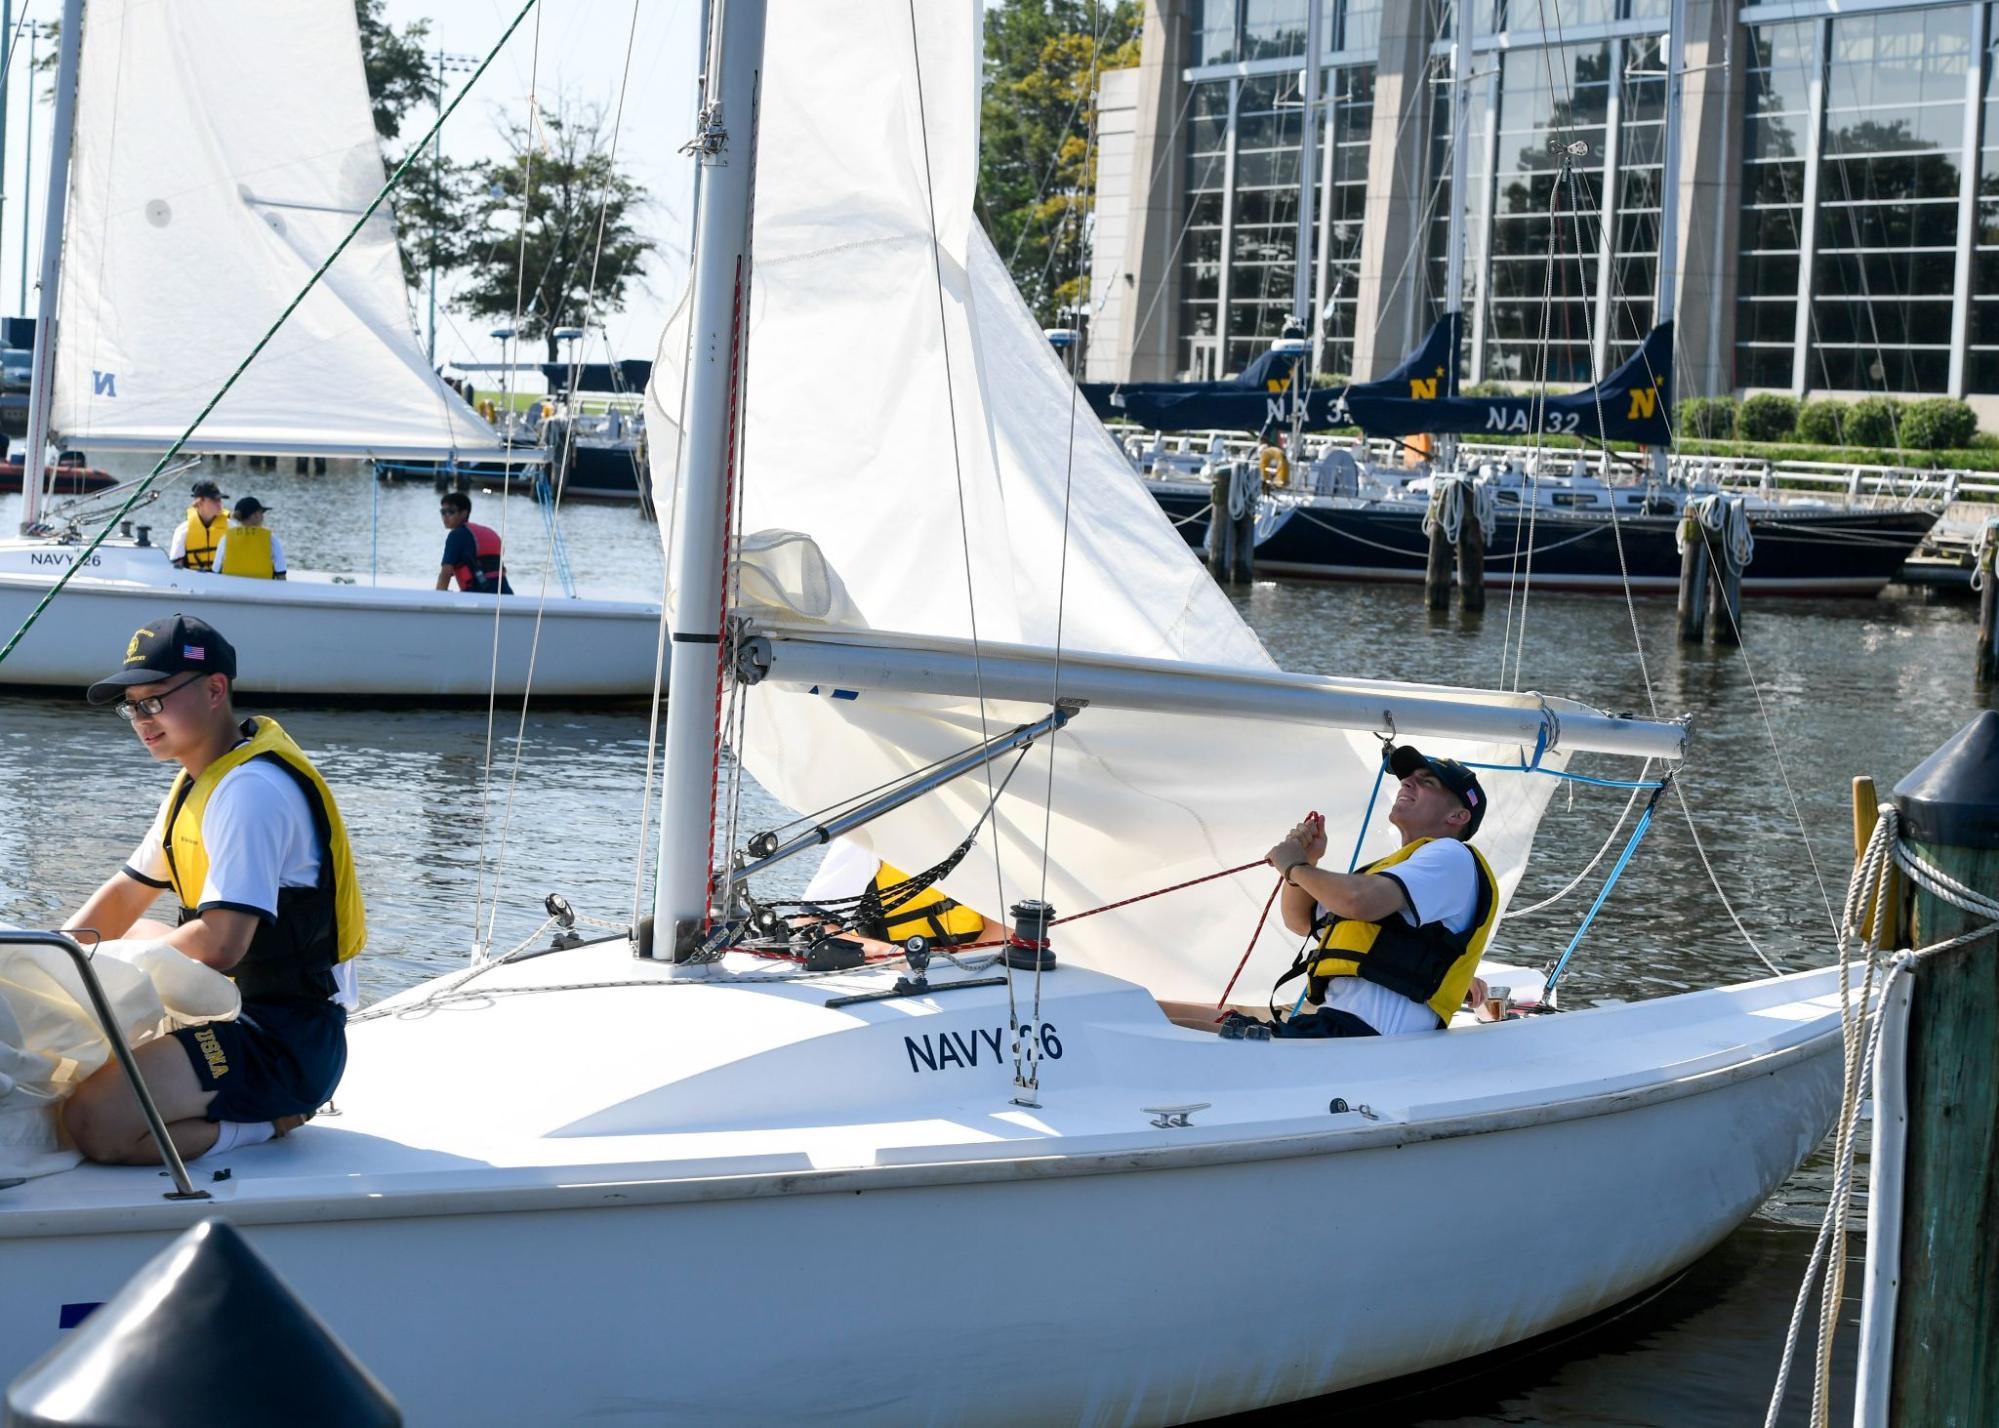 Plebe Summer: Learning the Ropes in Navy Sailing